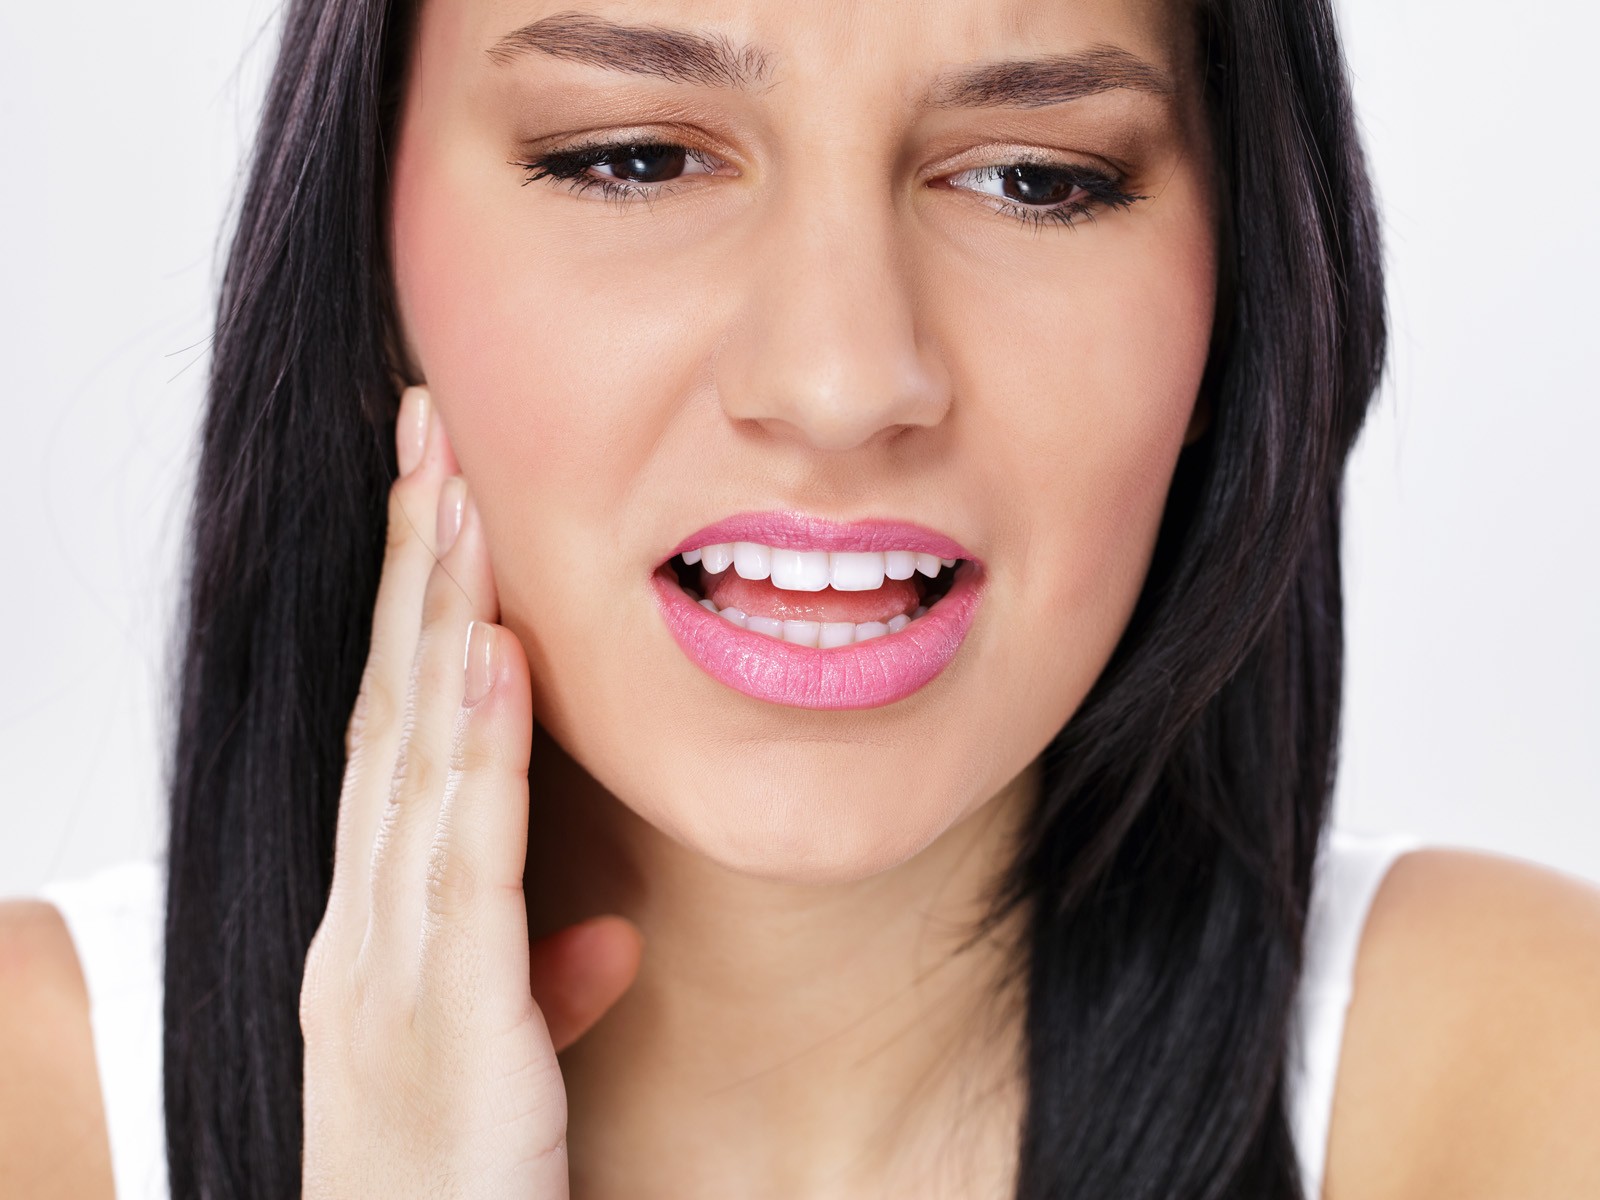 What can I take for my toothache?